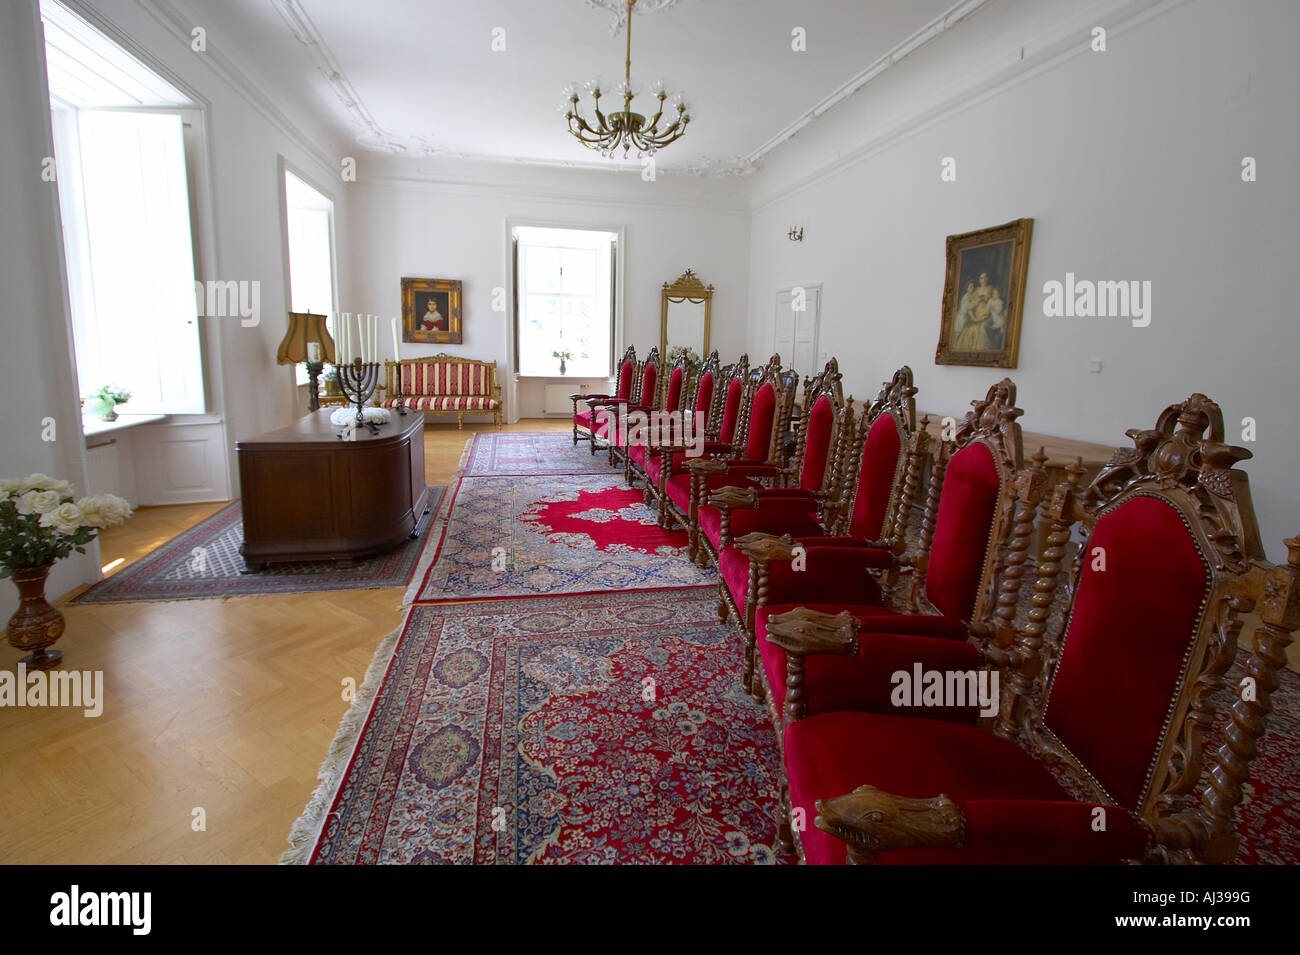 room for ceremonial events Stock Photo